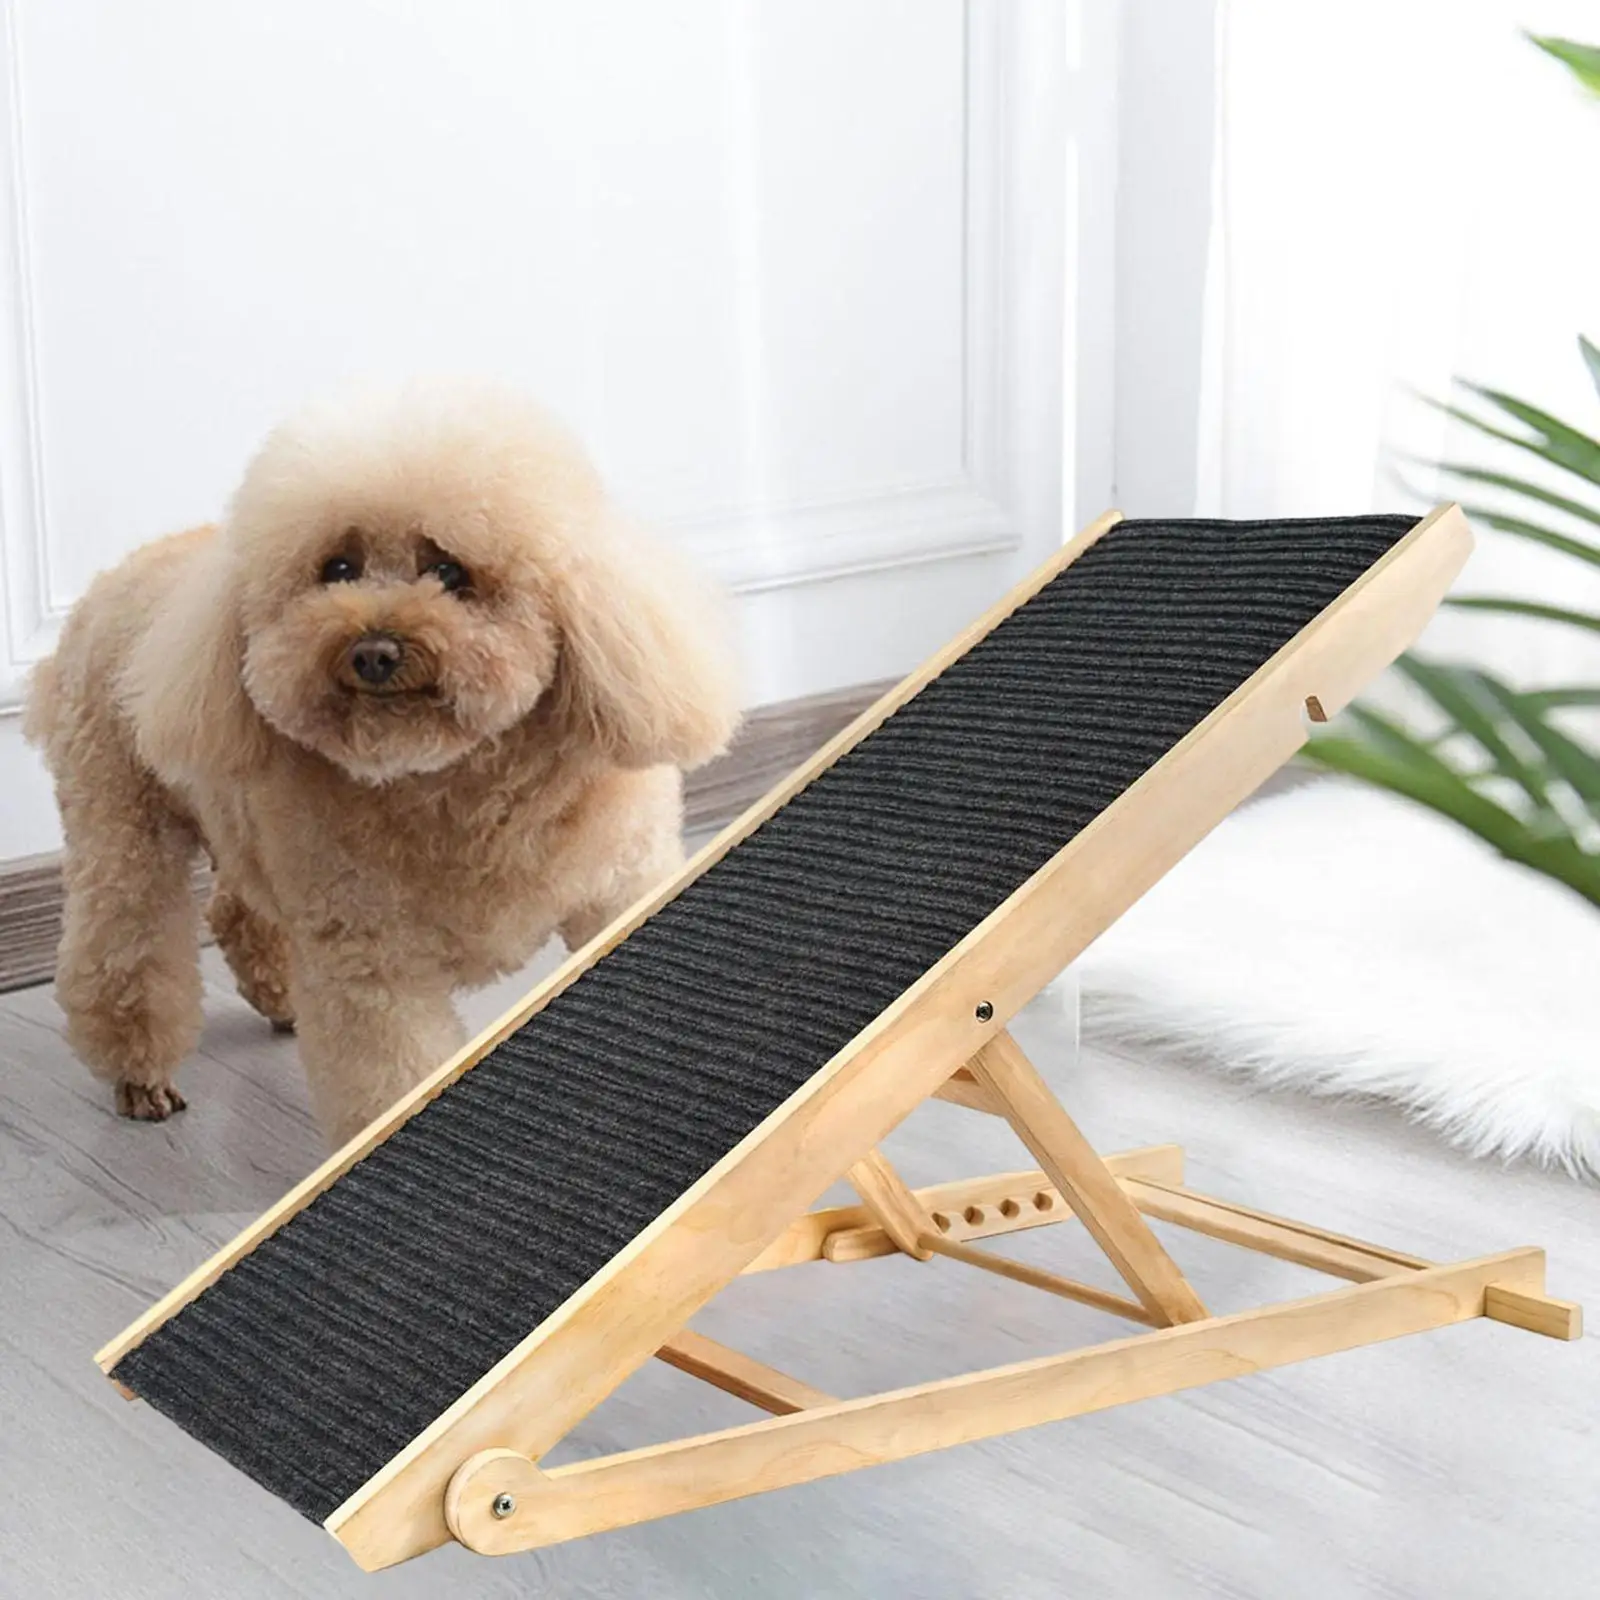 Wood Dog Ramp Height Adjustable Pet Ladder Foldable Portable for Car Couch